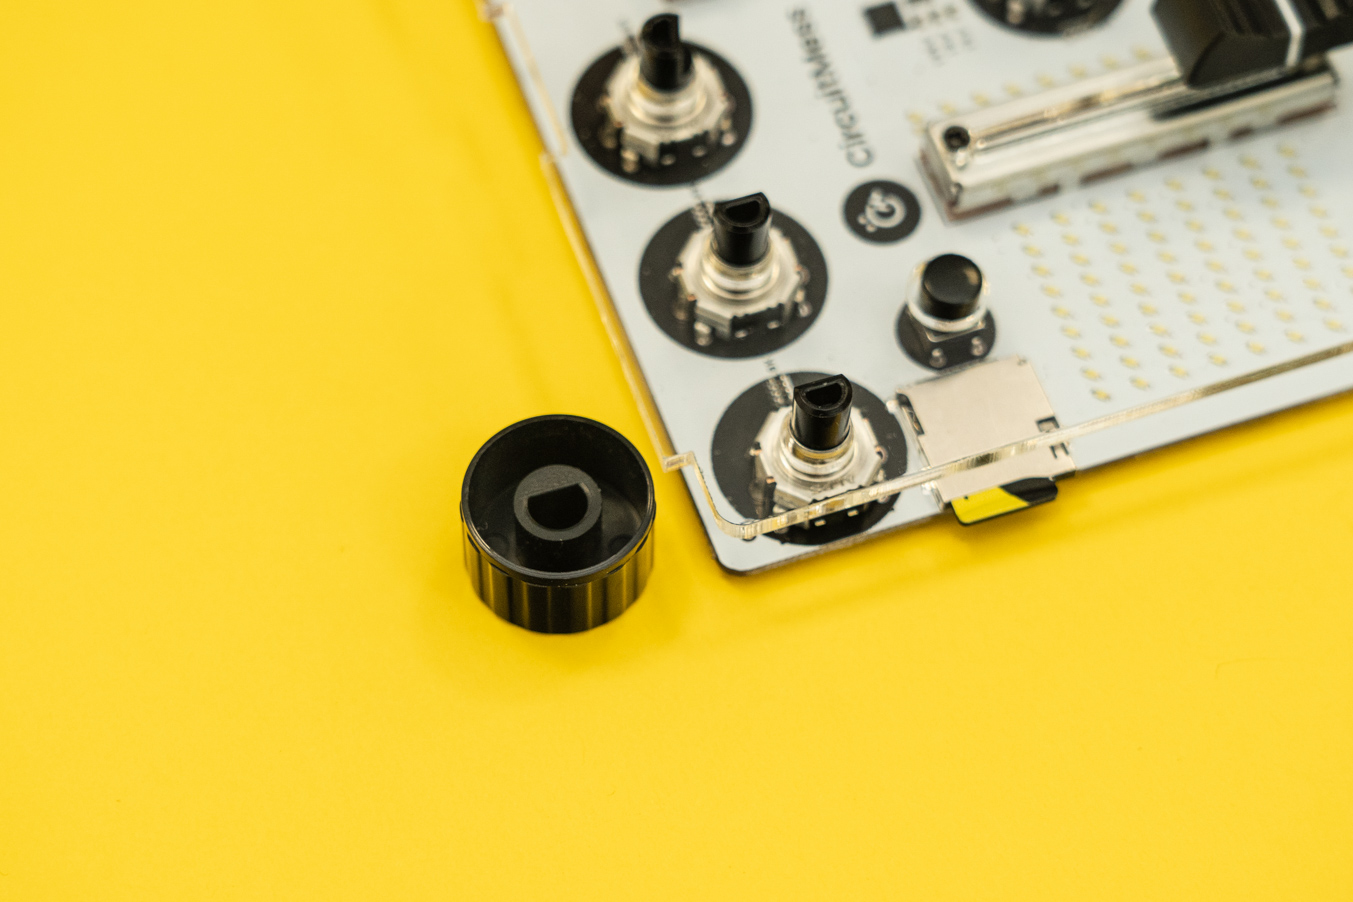 Align the cap to fit the rotary encoder component on the board